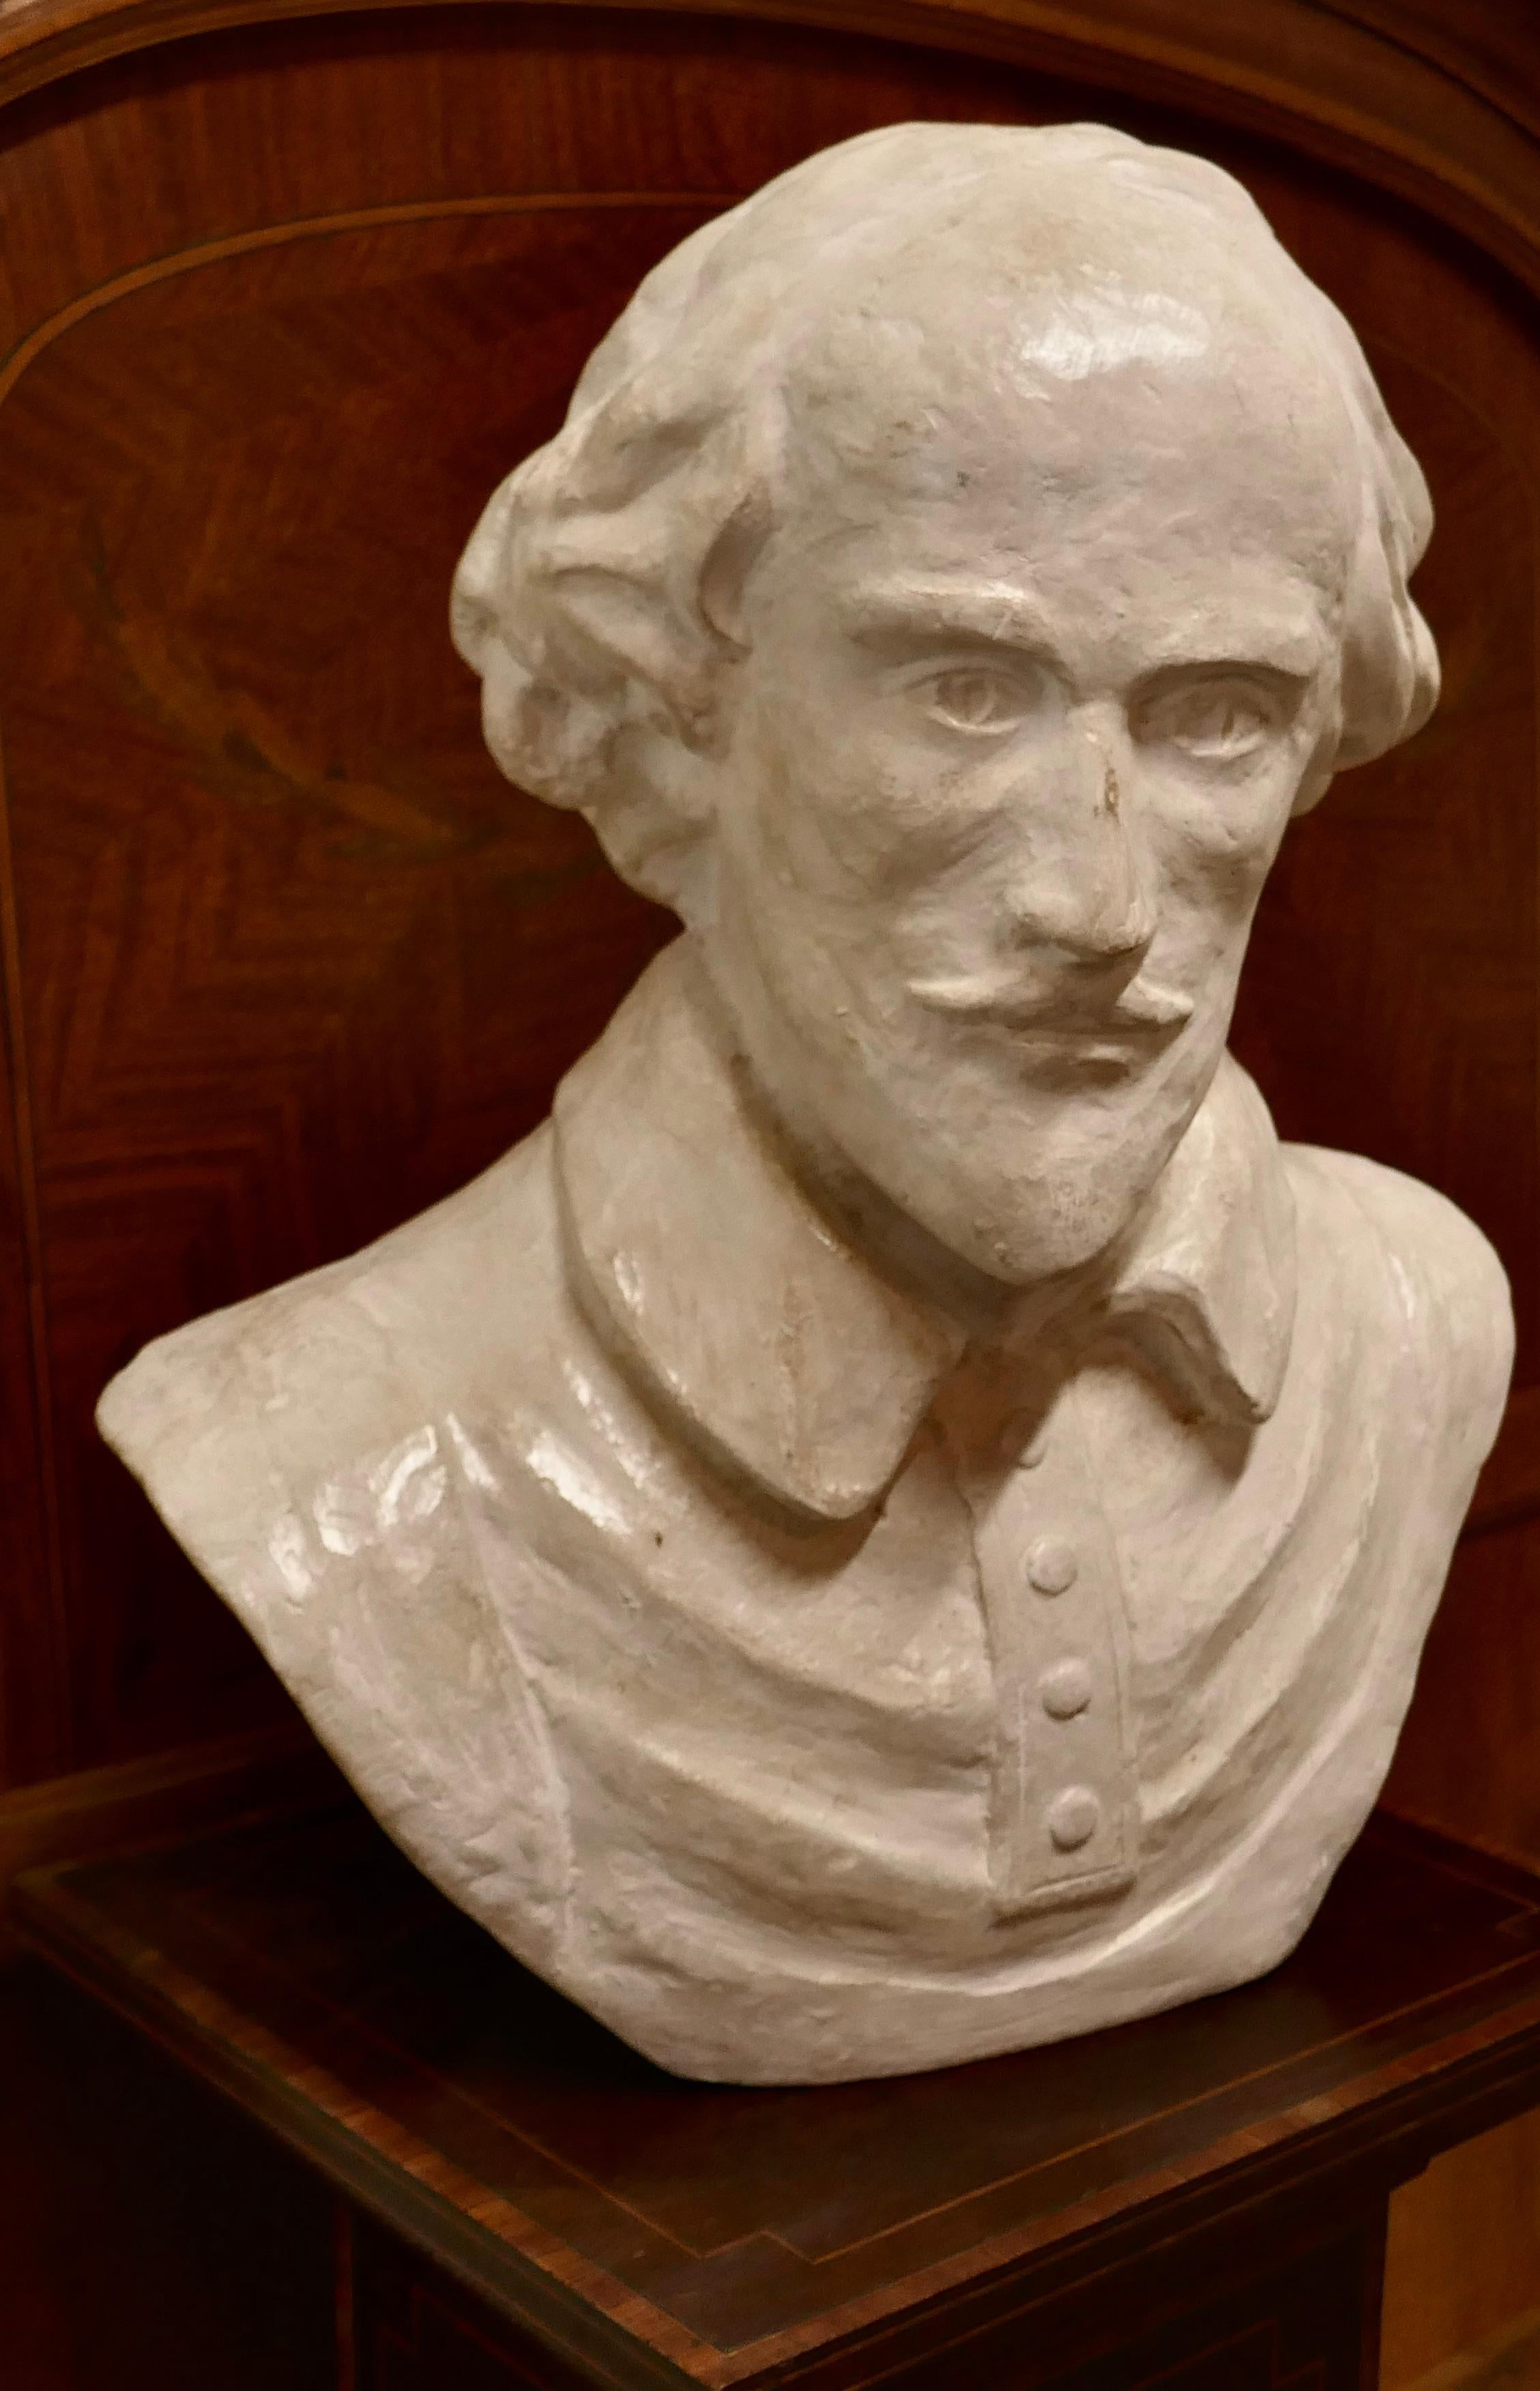 A Good Large Bust of William Shakespeare

A Good Large Bust of William Shakespeare, this is a good quality bust, it is made in plaster and has a good patina 
This is an elegant likeness of the Bard in his middle years
The Statue is 19” high and